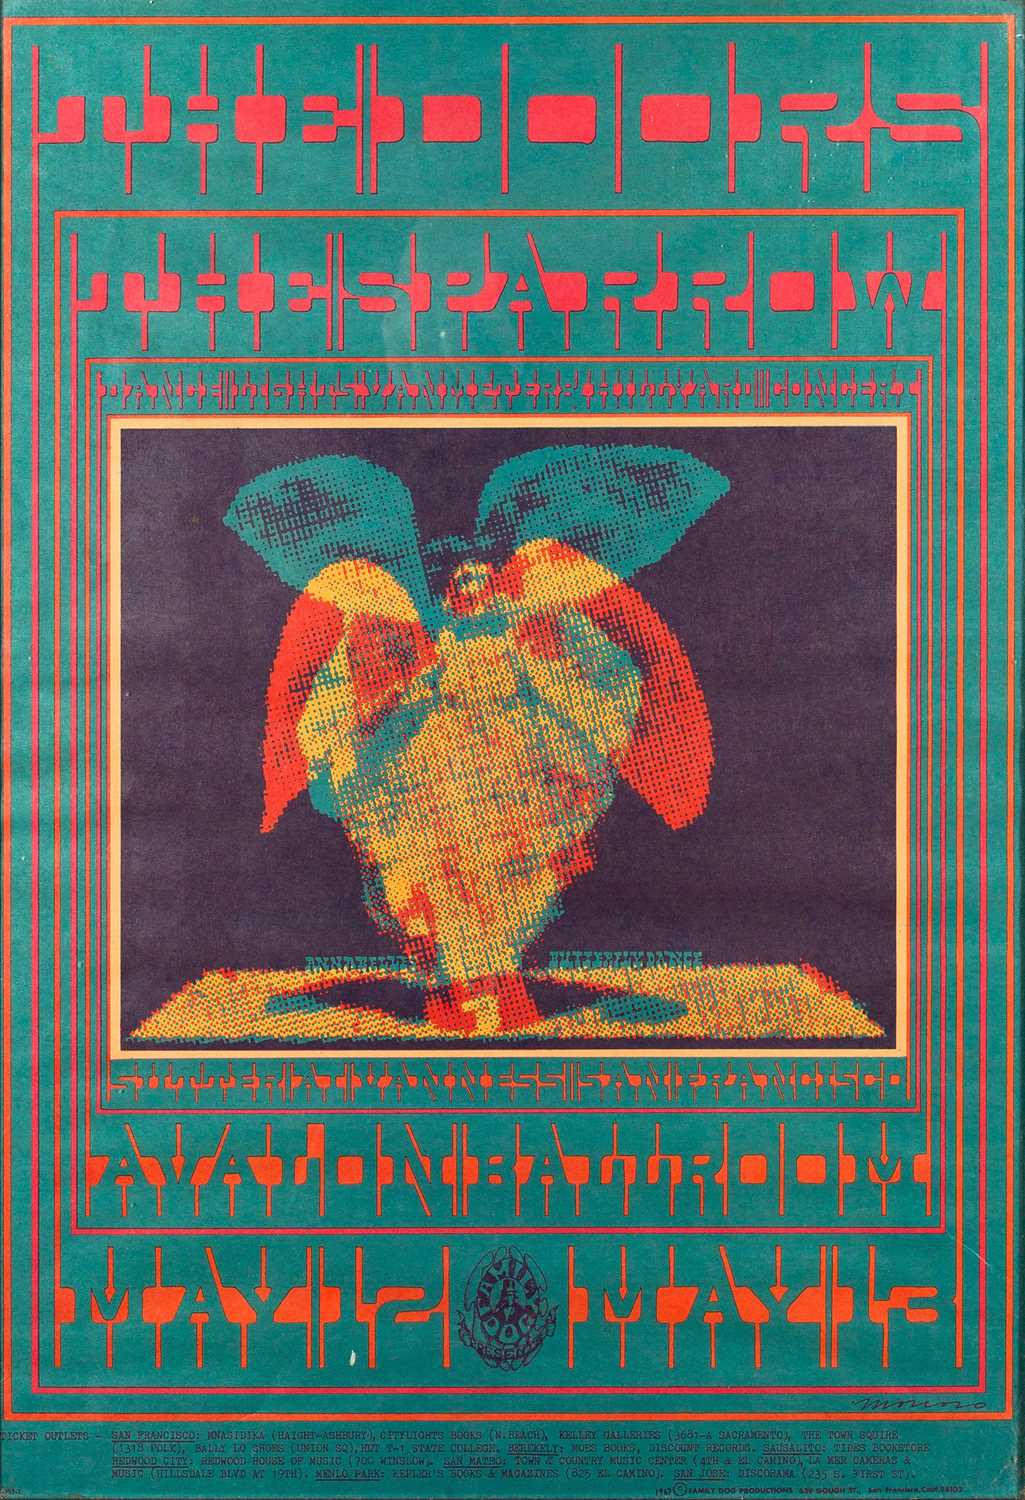 Lot 40 - VICTOR MOSCOSO - ORIGINAL FIRST PRINT 'ANNABELLE'S BUTTERFLY DANCE' - THE DOORS -POSTER.